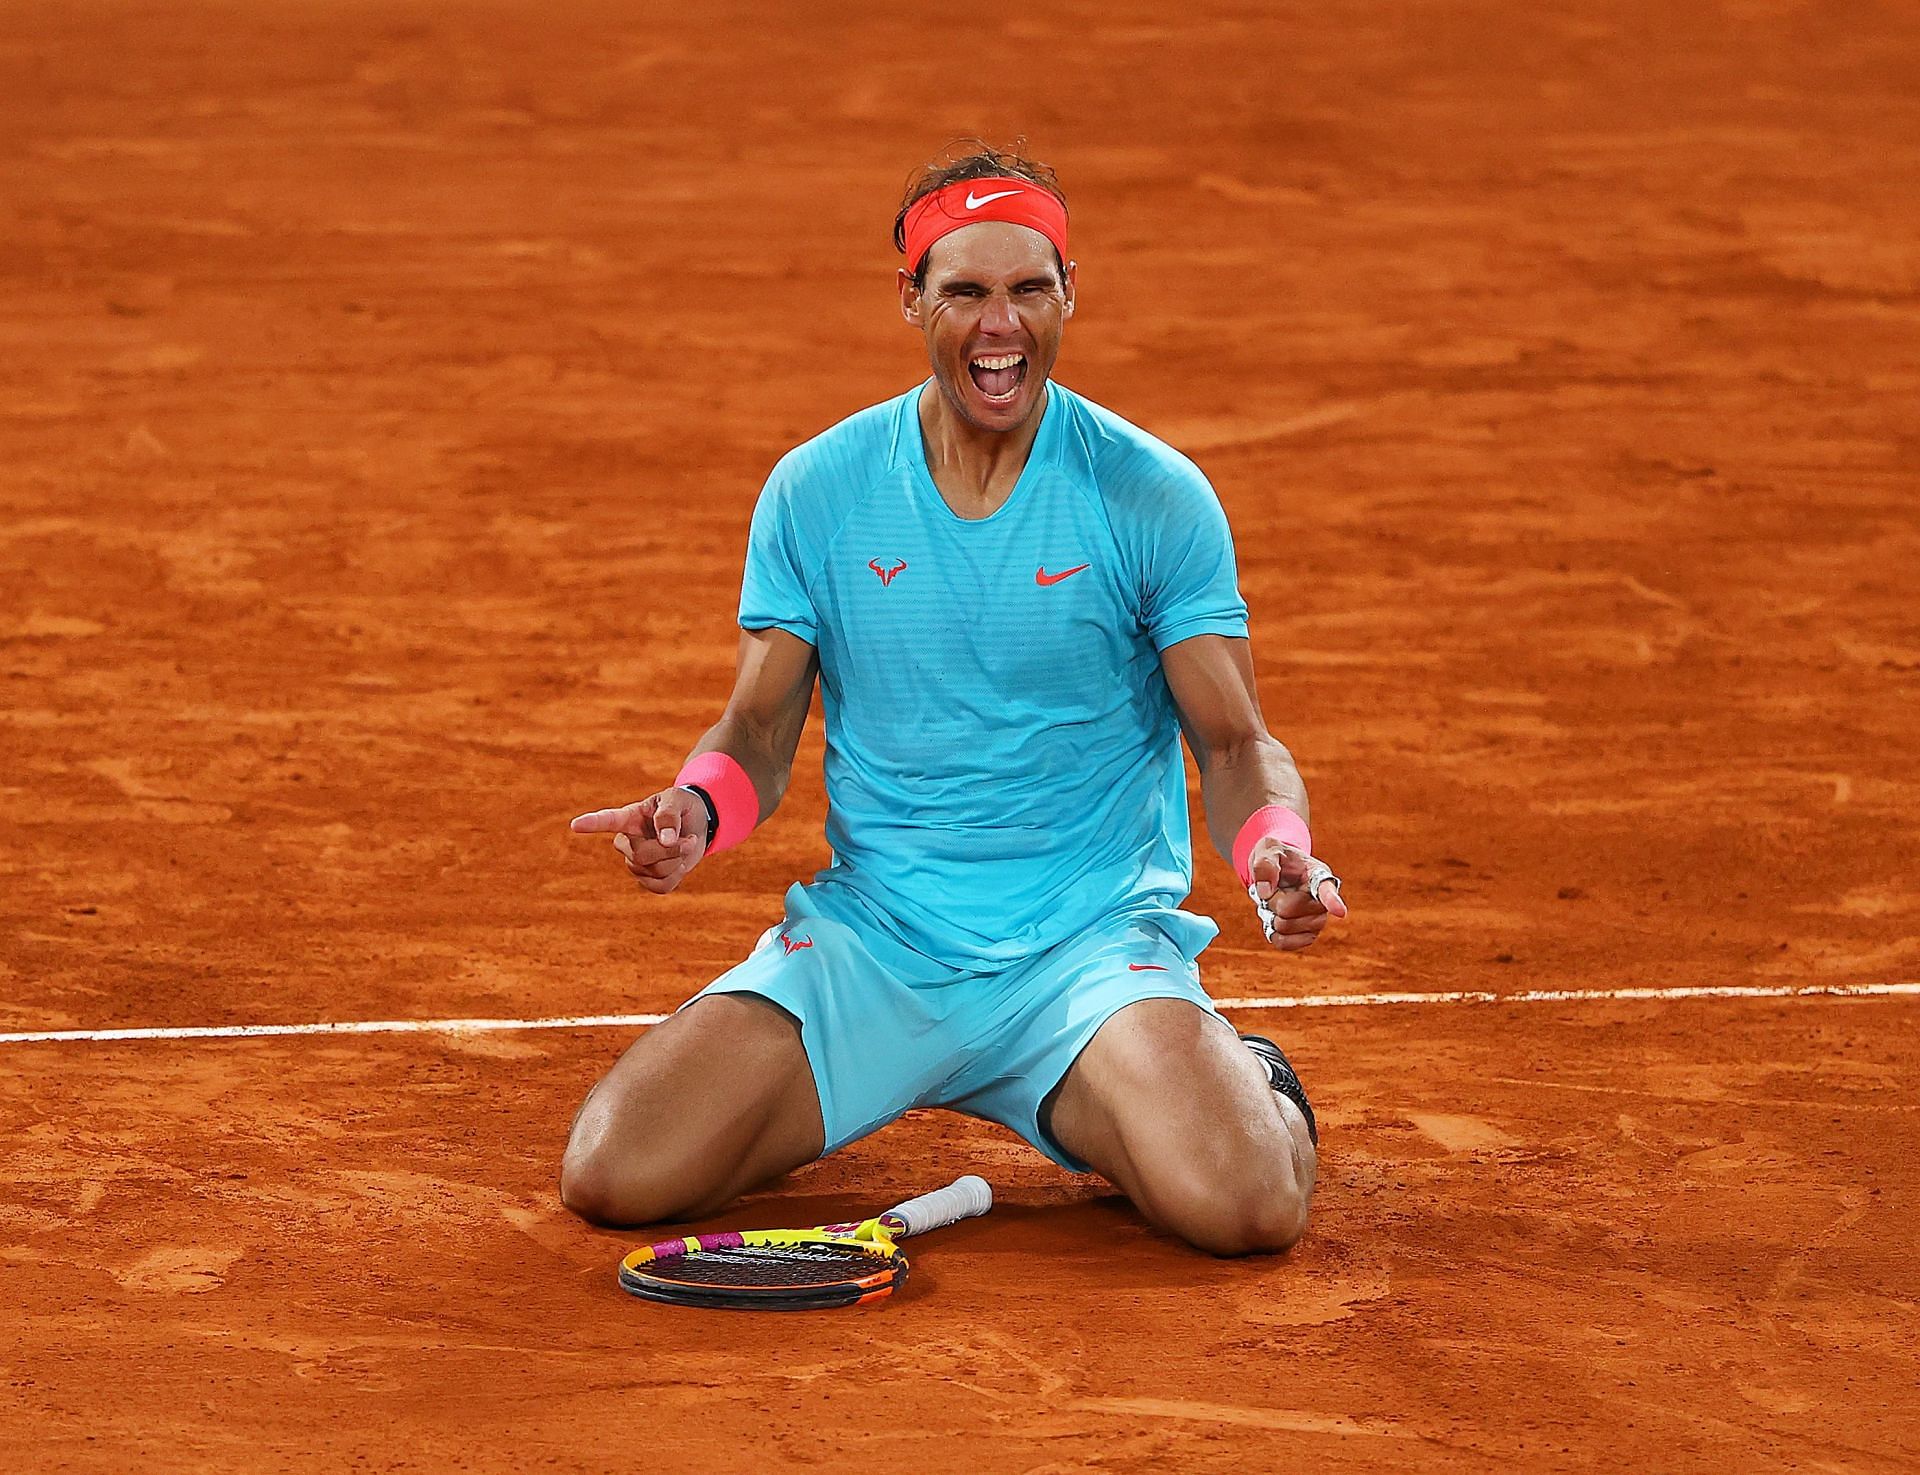 Rafael Nadal won the 2020 French Open without dropping a set